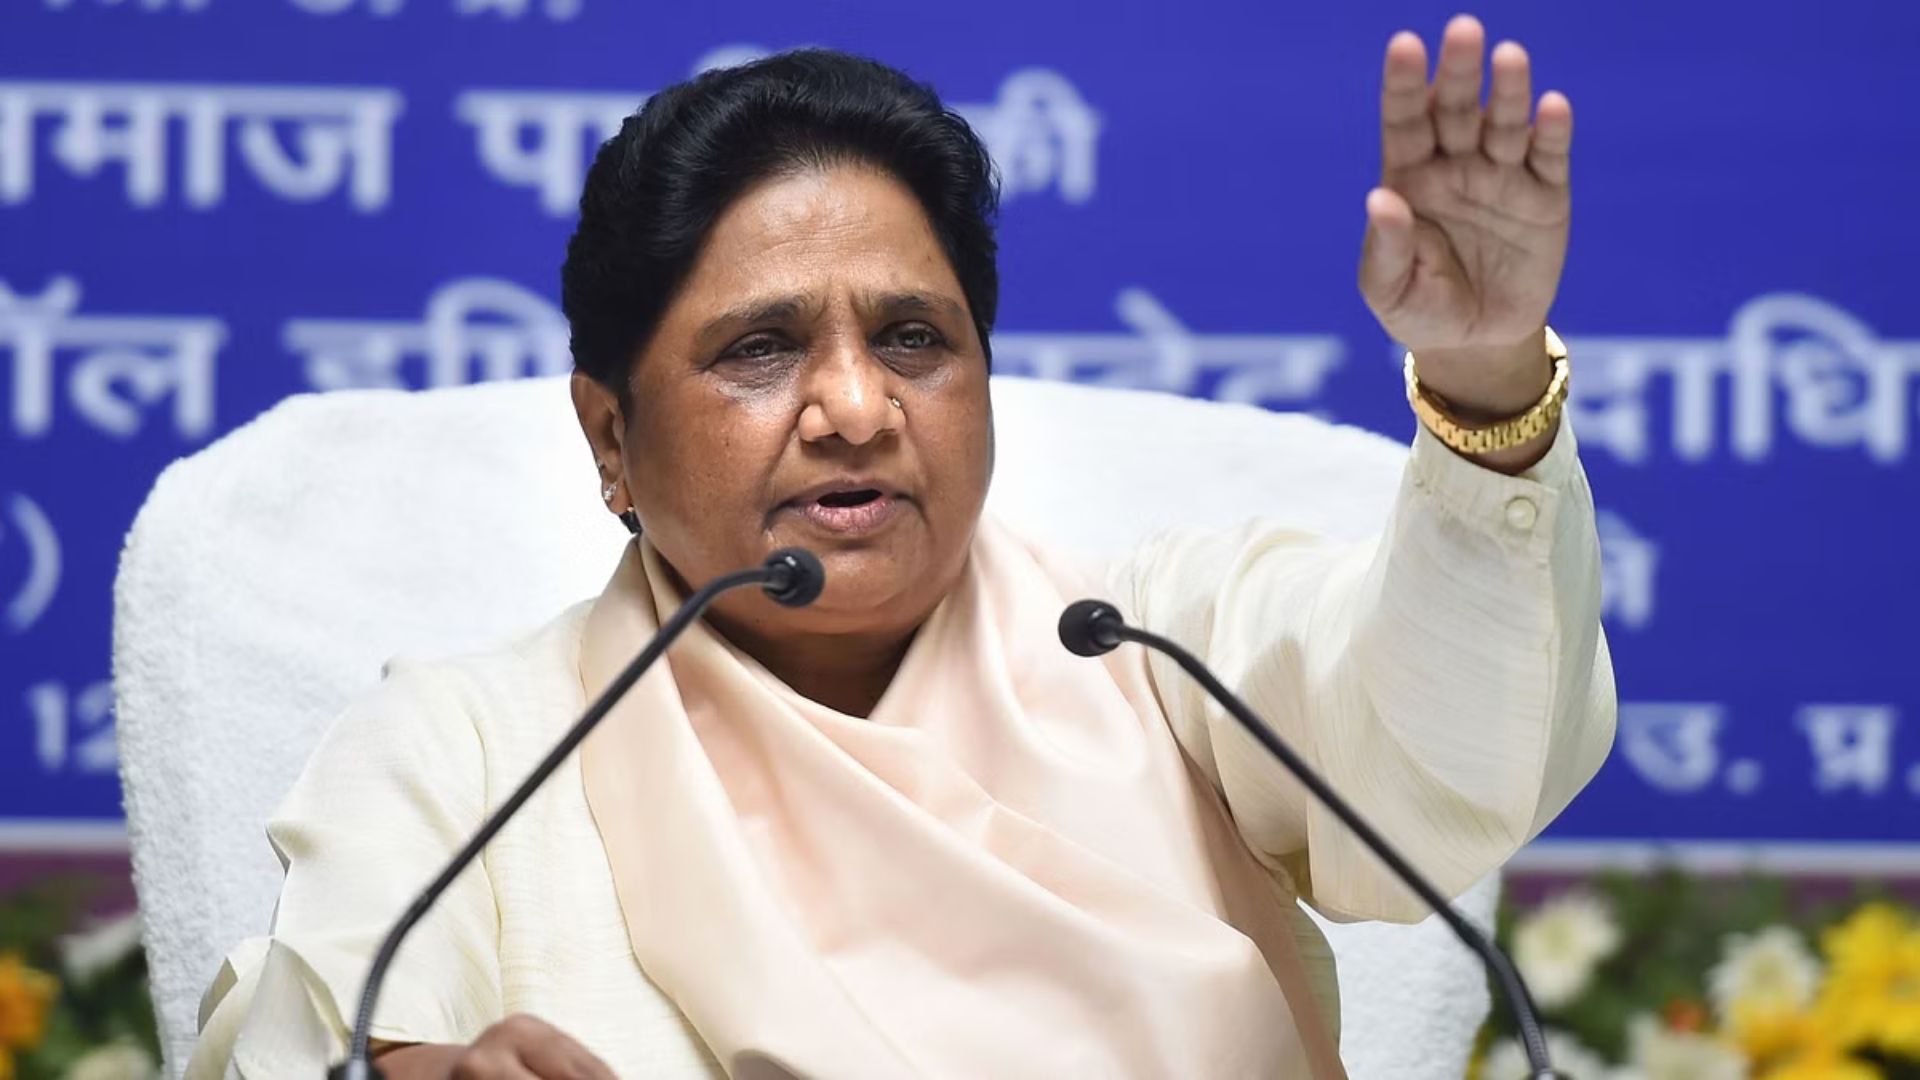 BSP Leader Mayawati: Party believes in demonstrating actions rather than just making statements